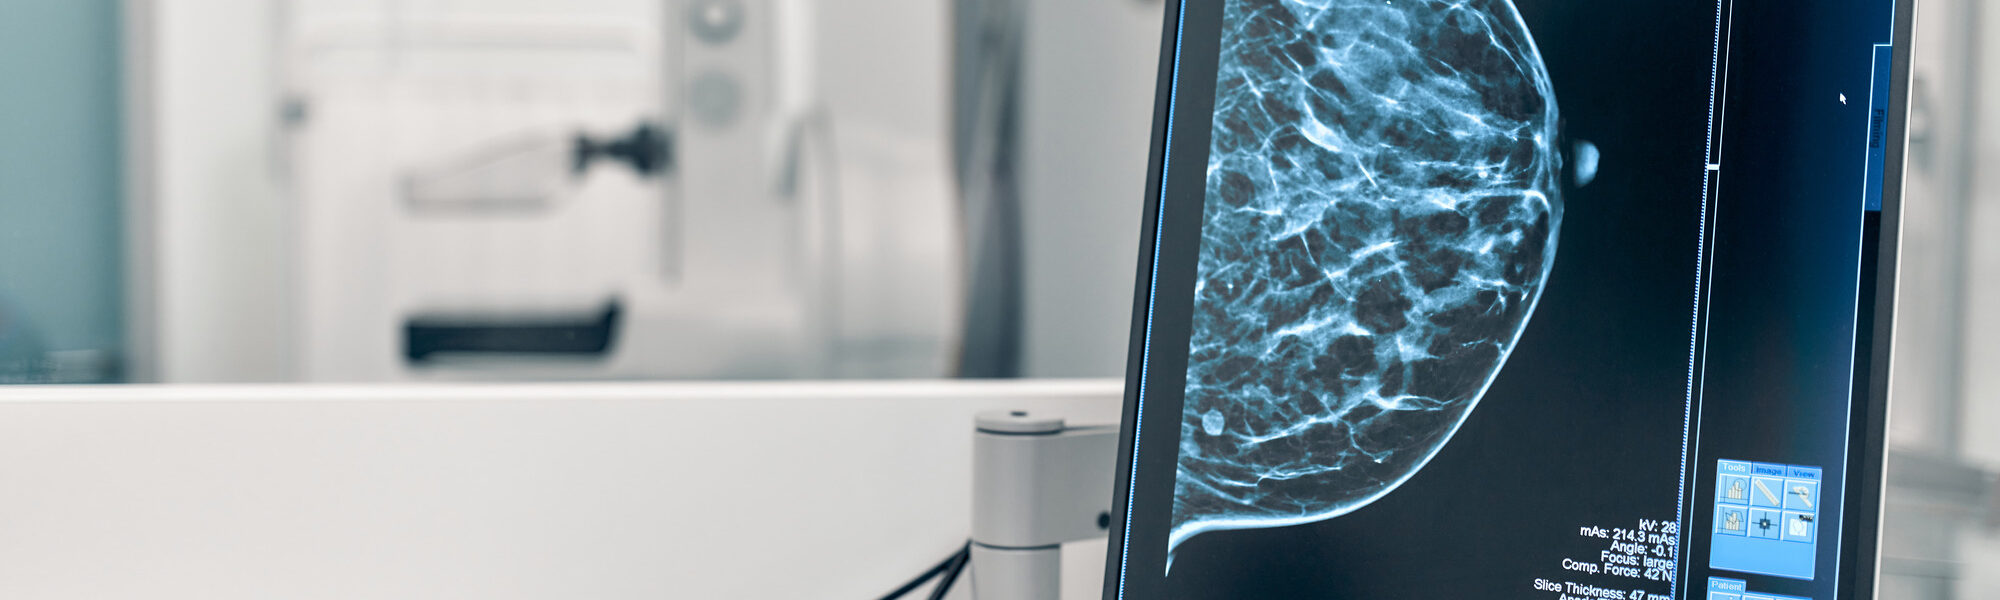 Breast density imaging on a screen